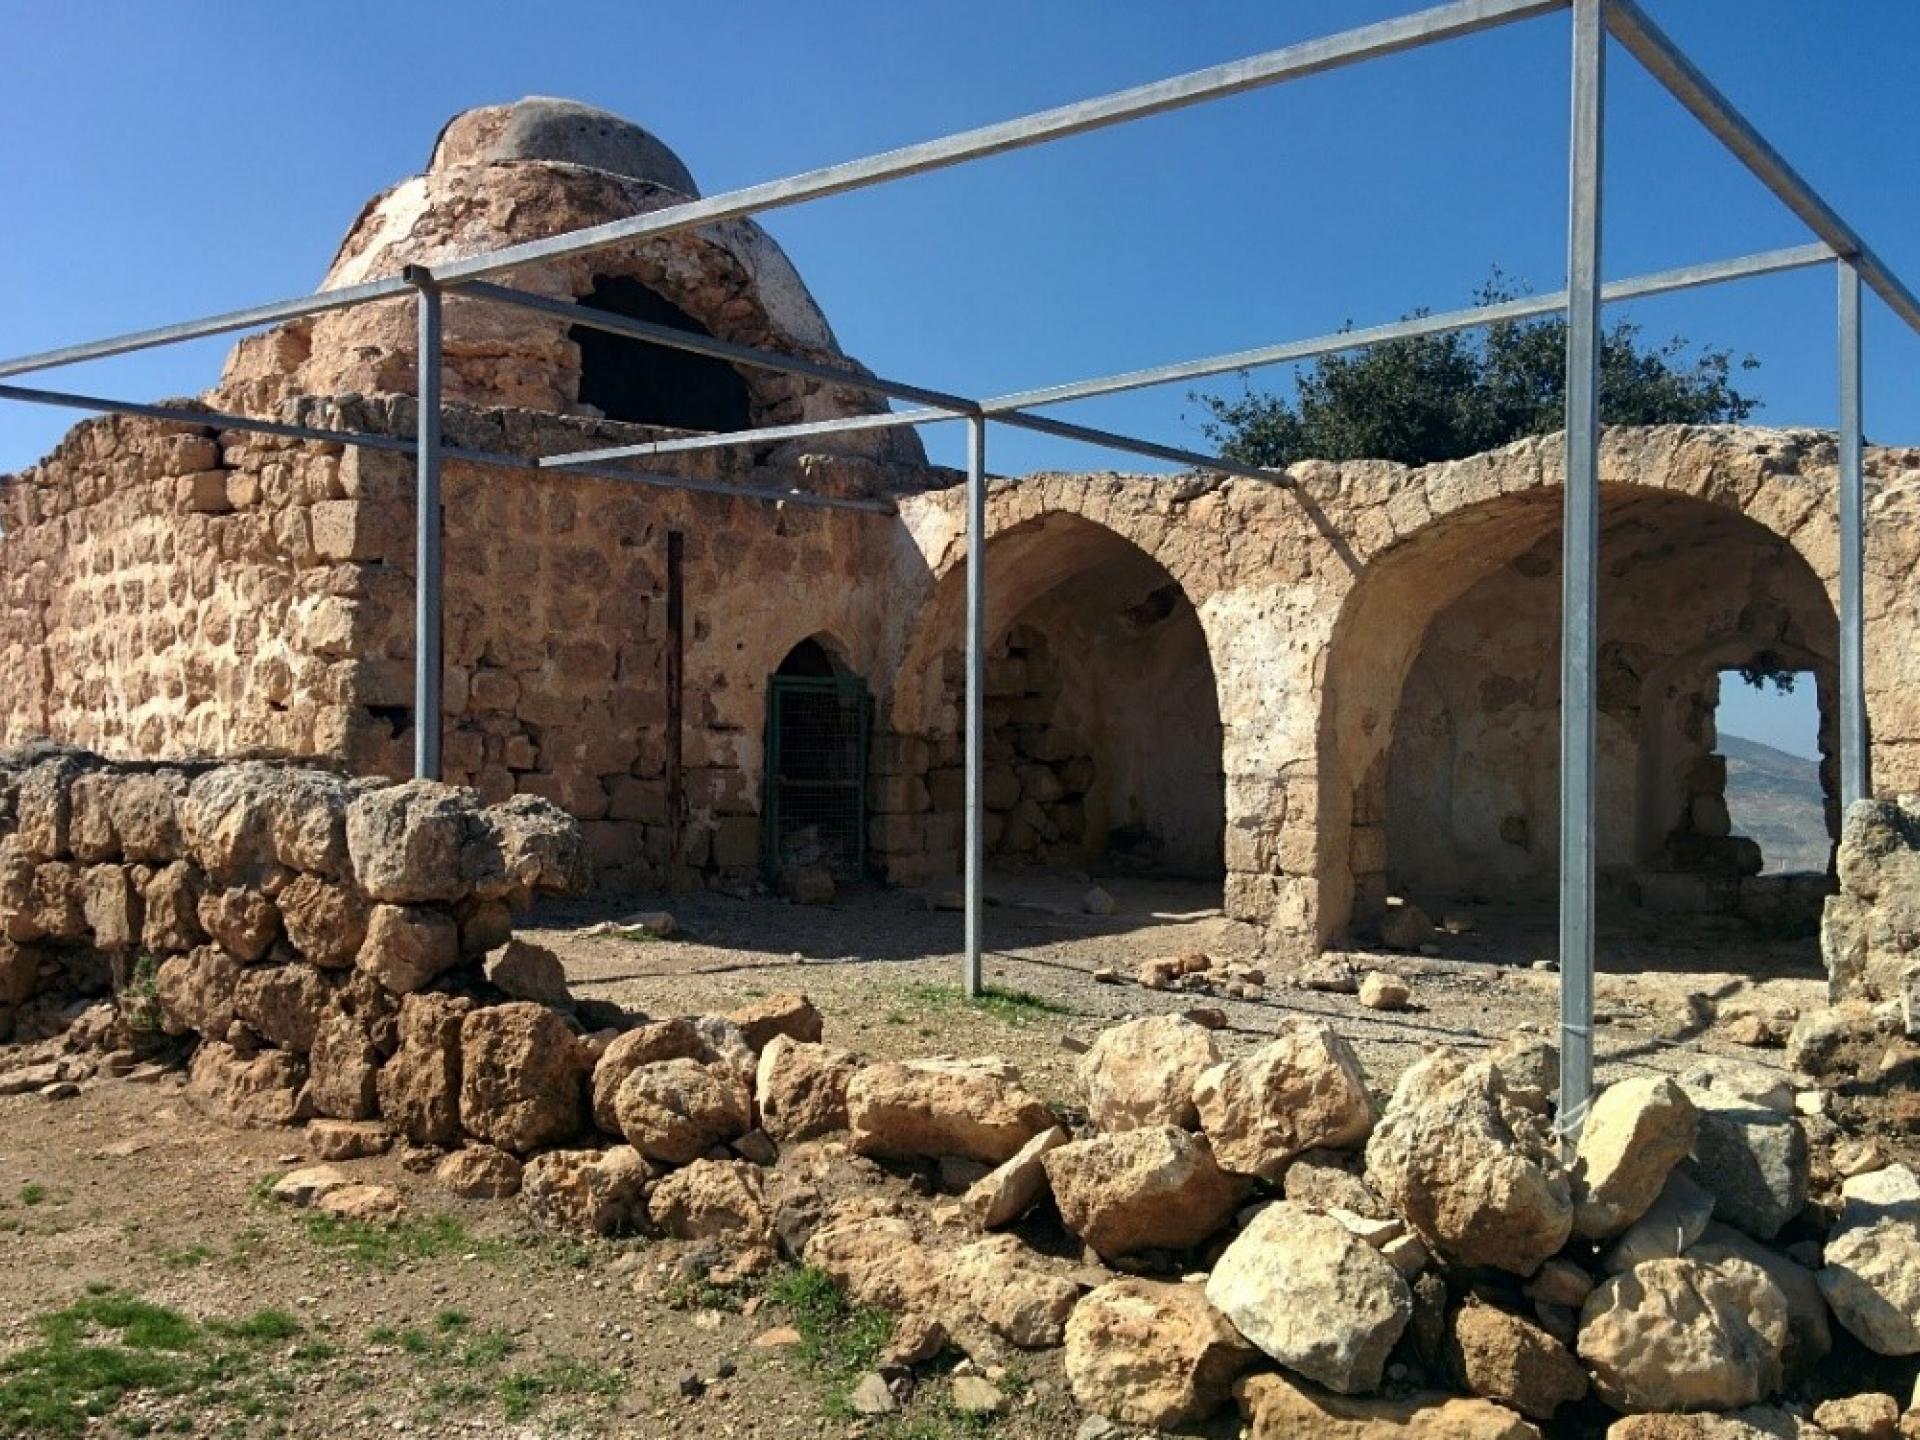 Maqam Sheikh Bilal: A Palestinian heritage site hundreds of years old